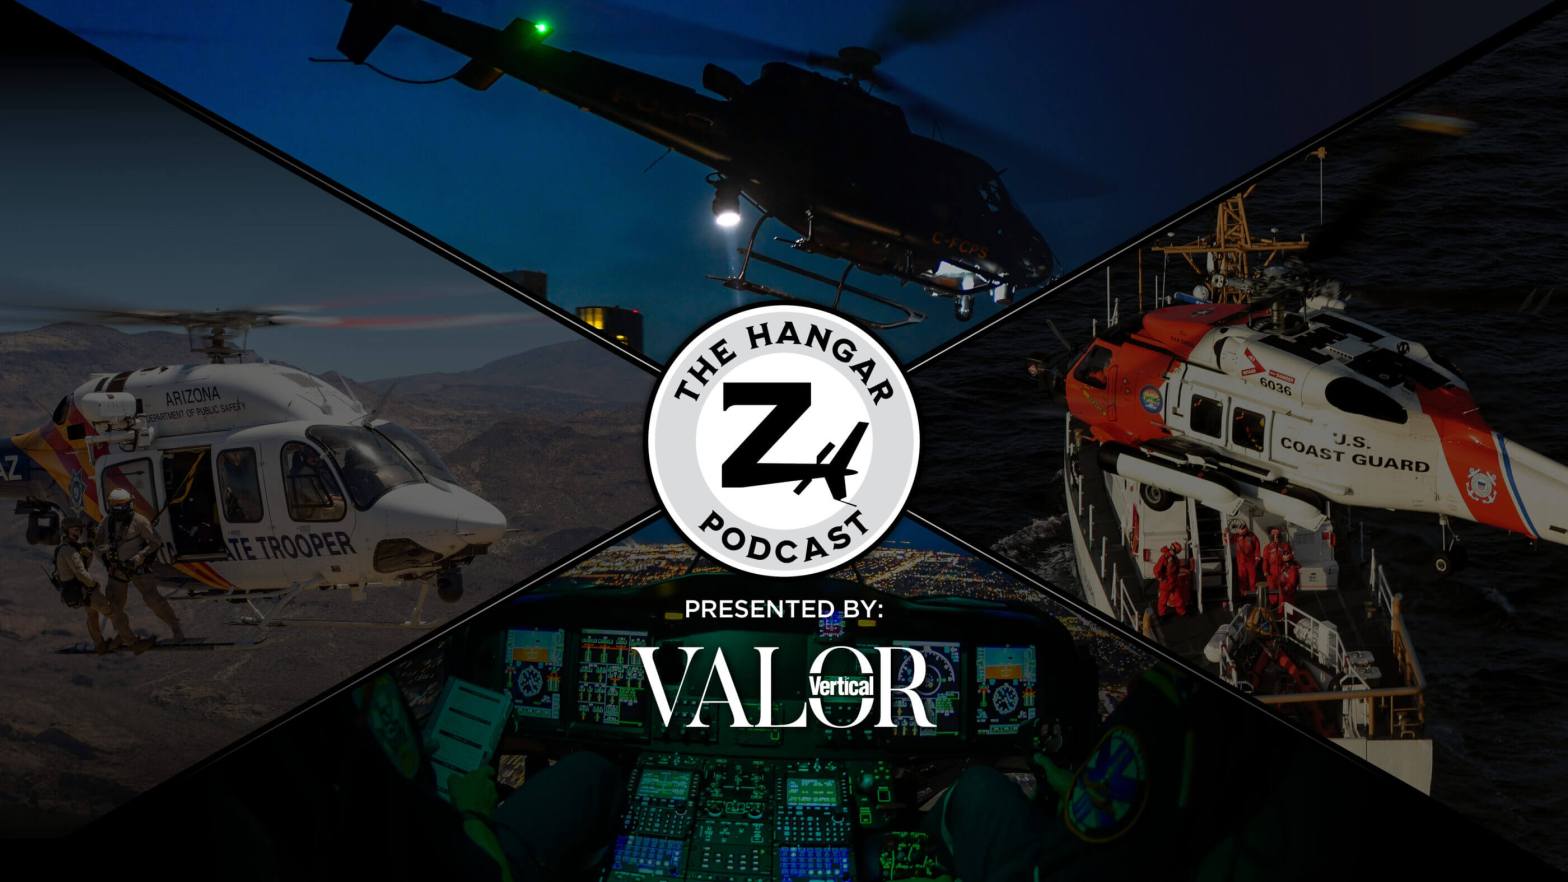 The Hangar Z Podcast: Lieutenant pilot Clay Lacey on selecting and training TFOs